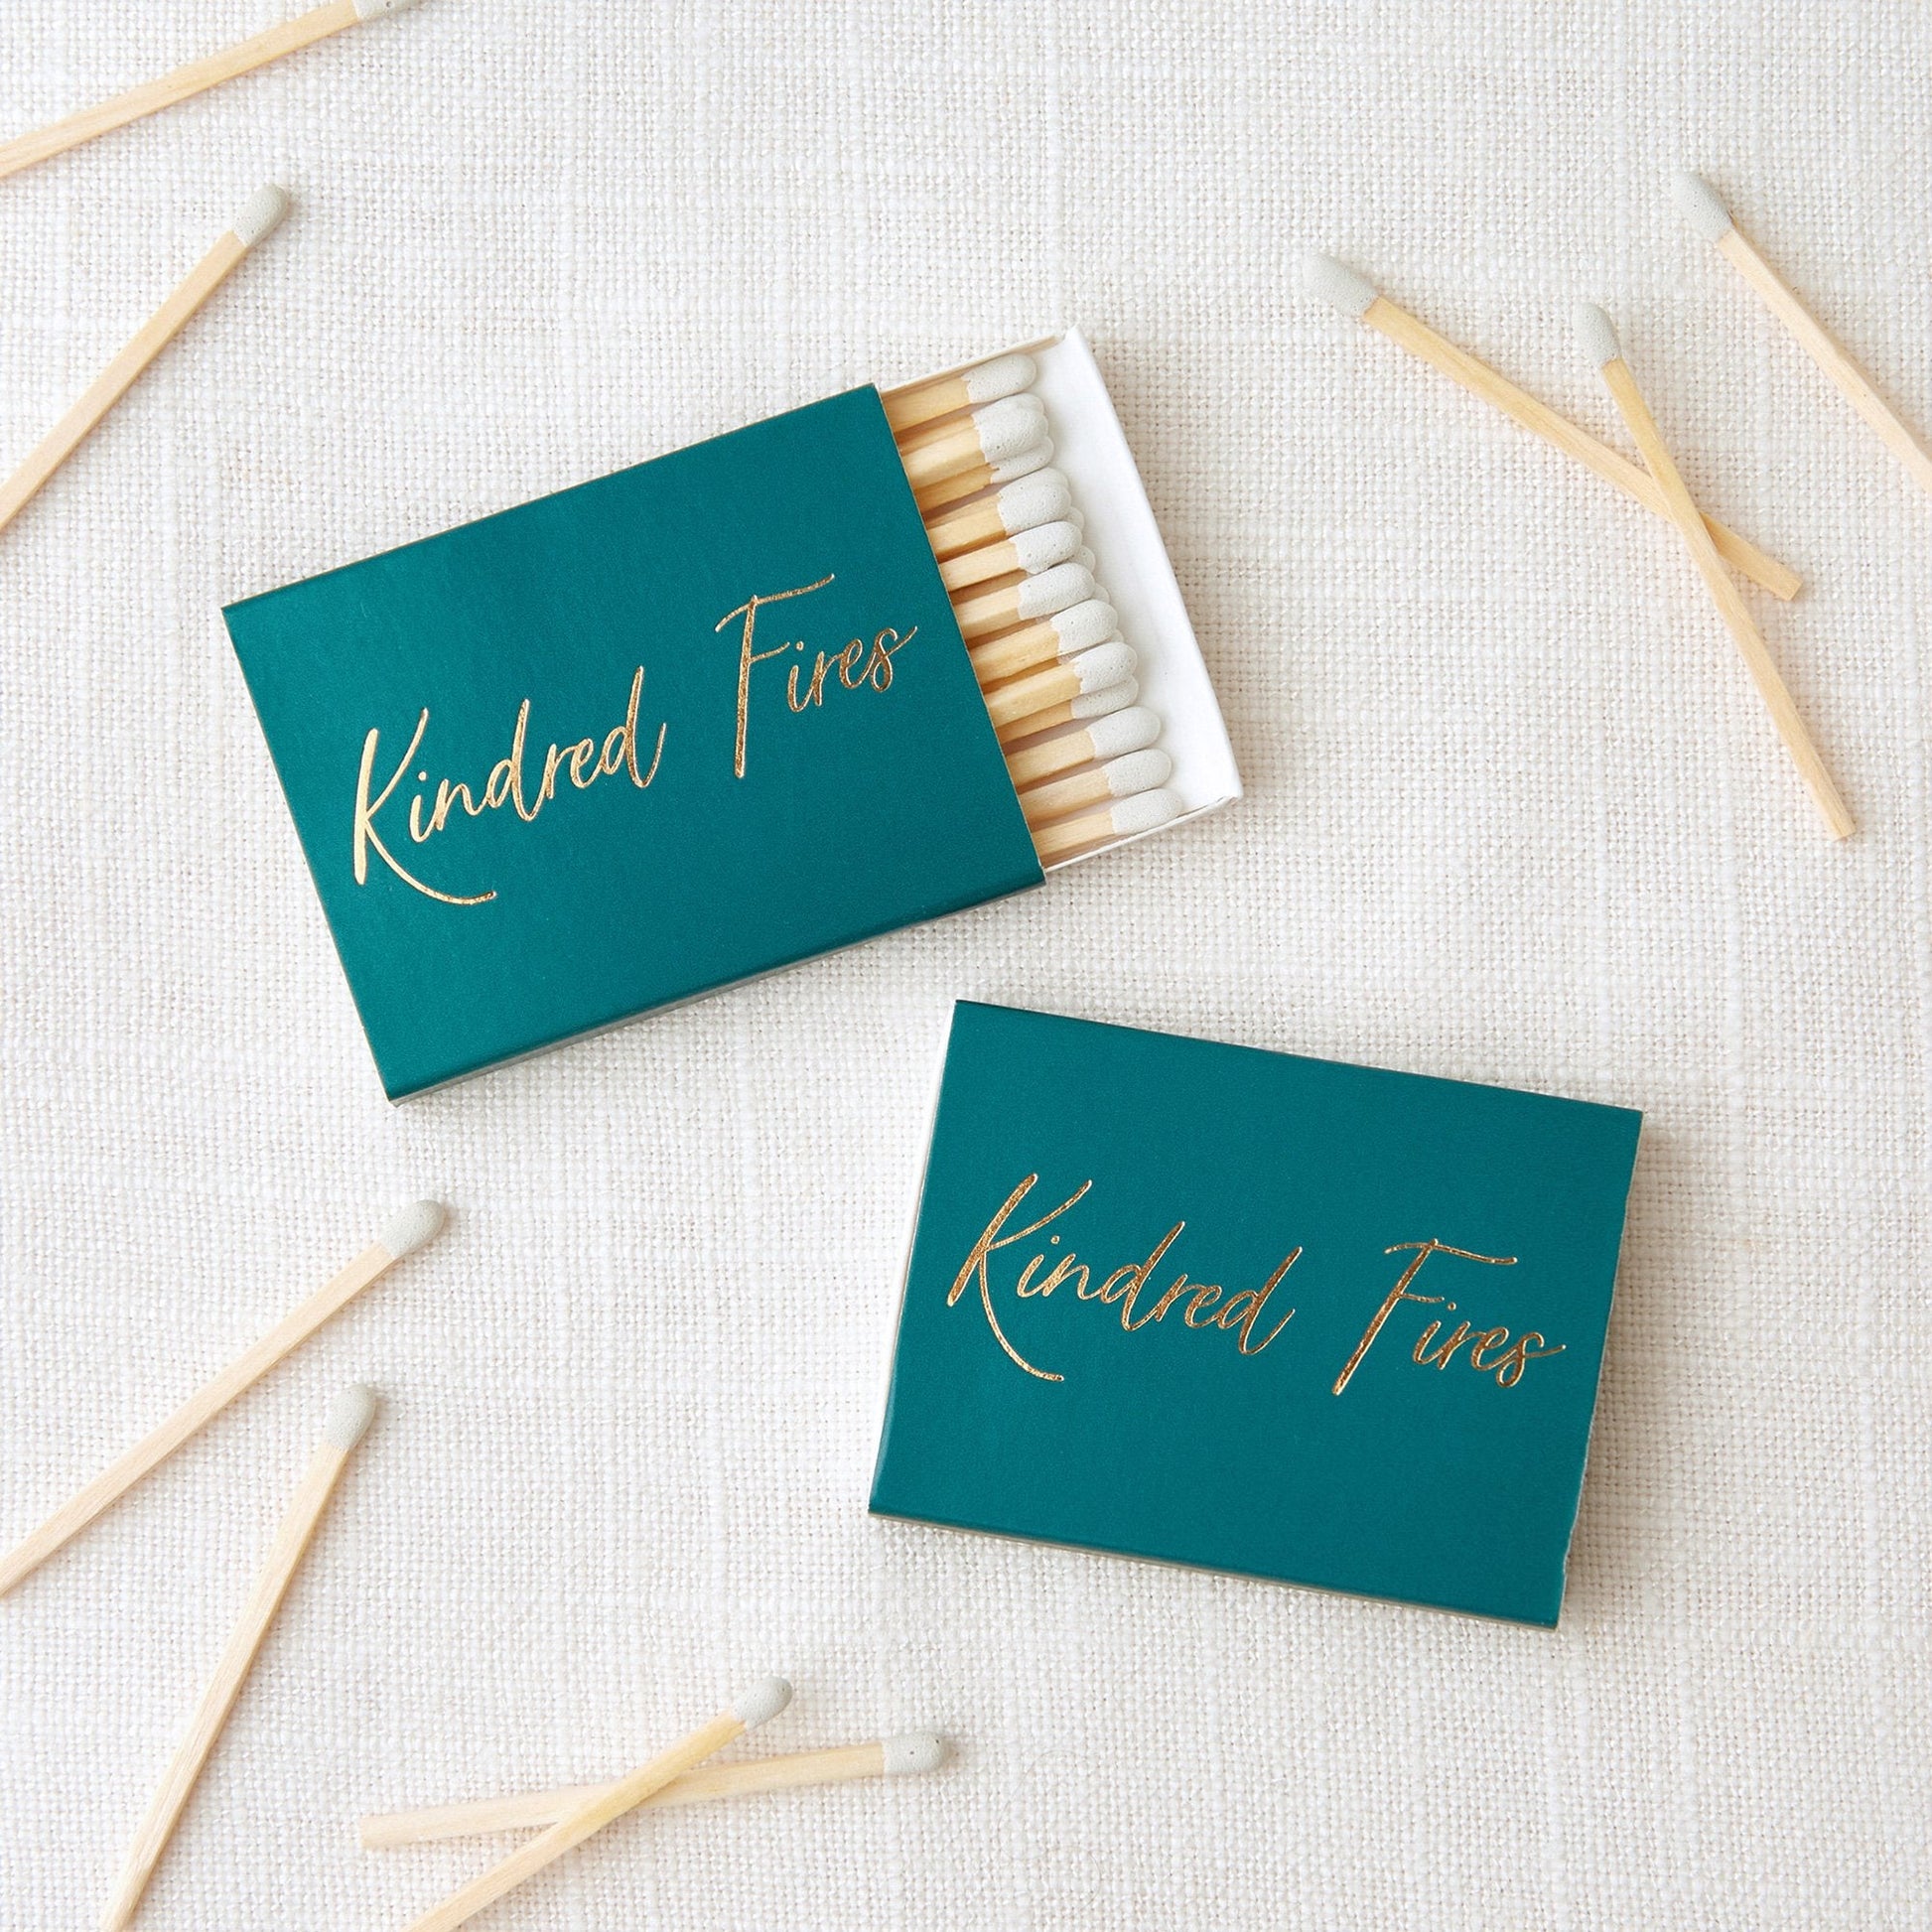 Valentine's Day Gift Matchbox Candle - Kindred Fires